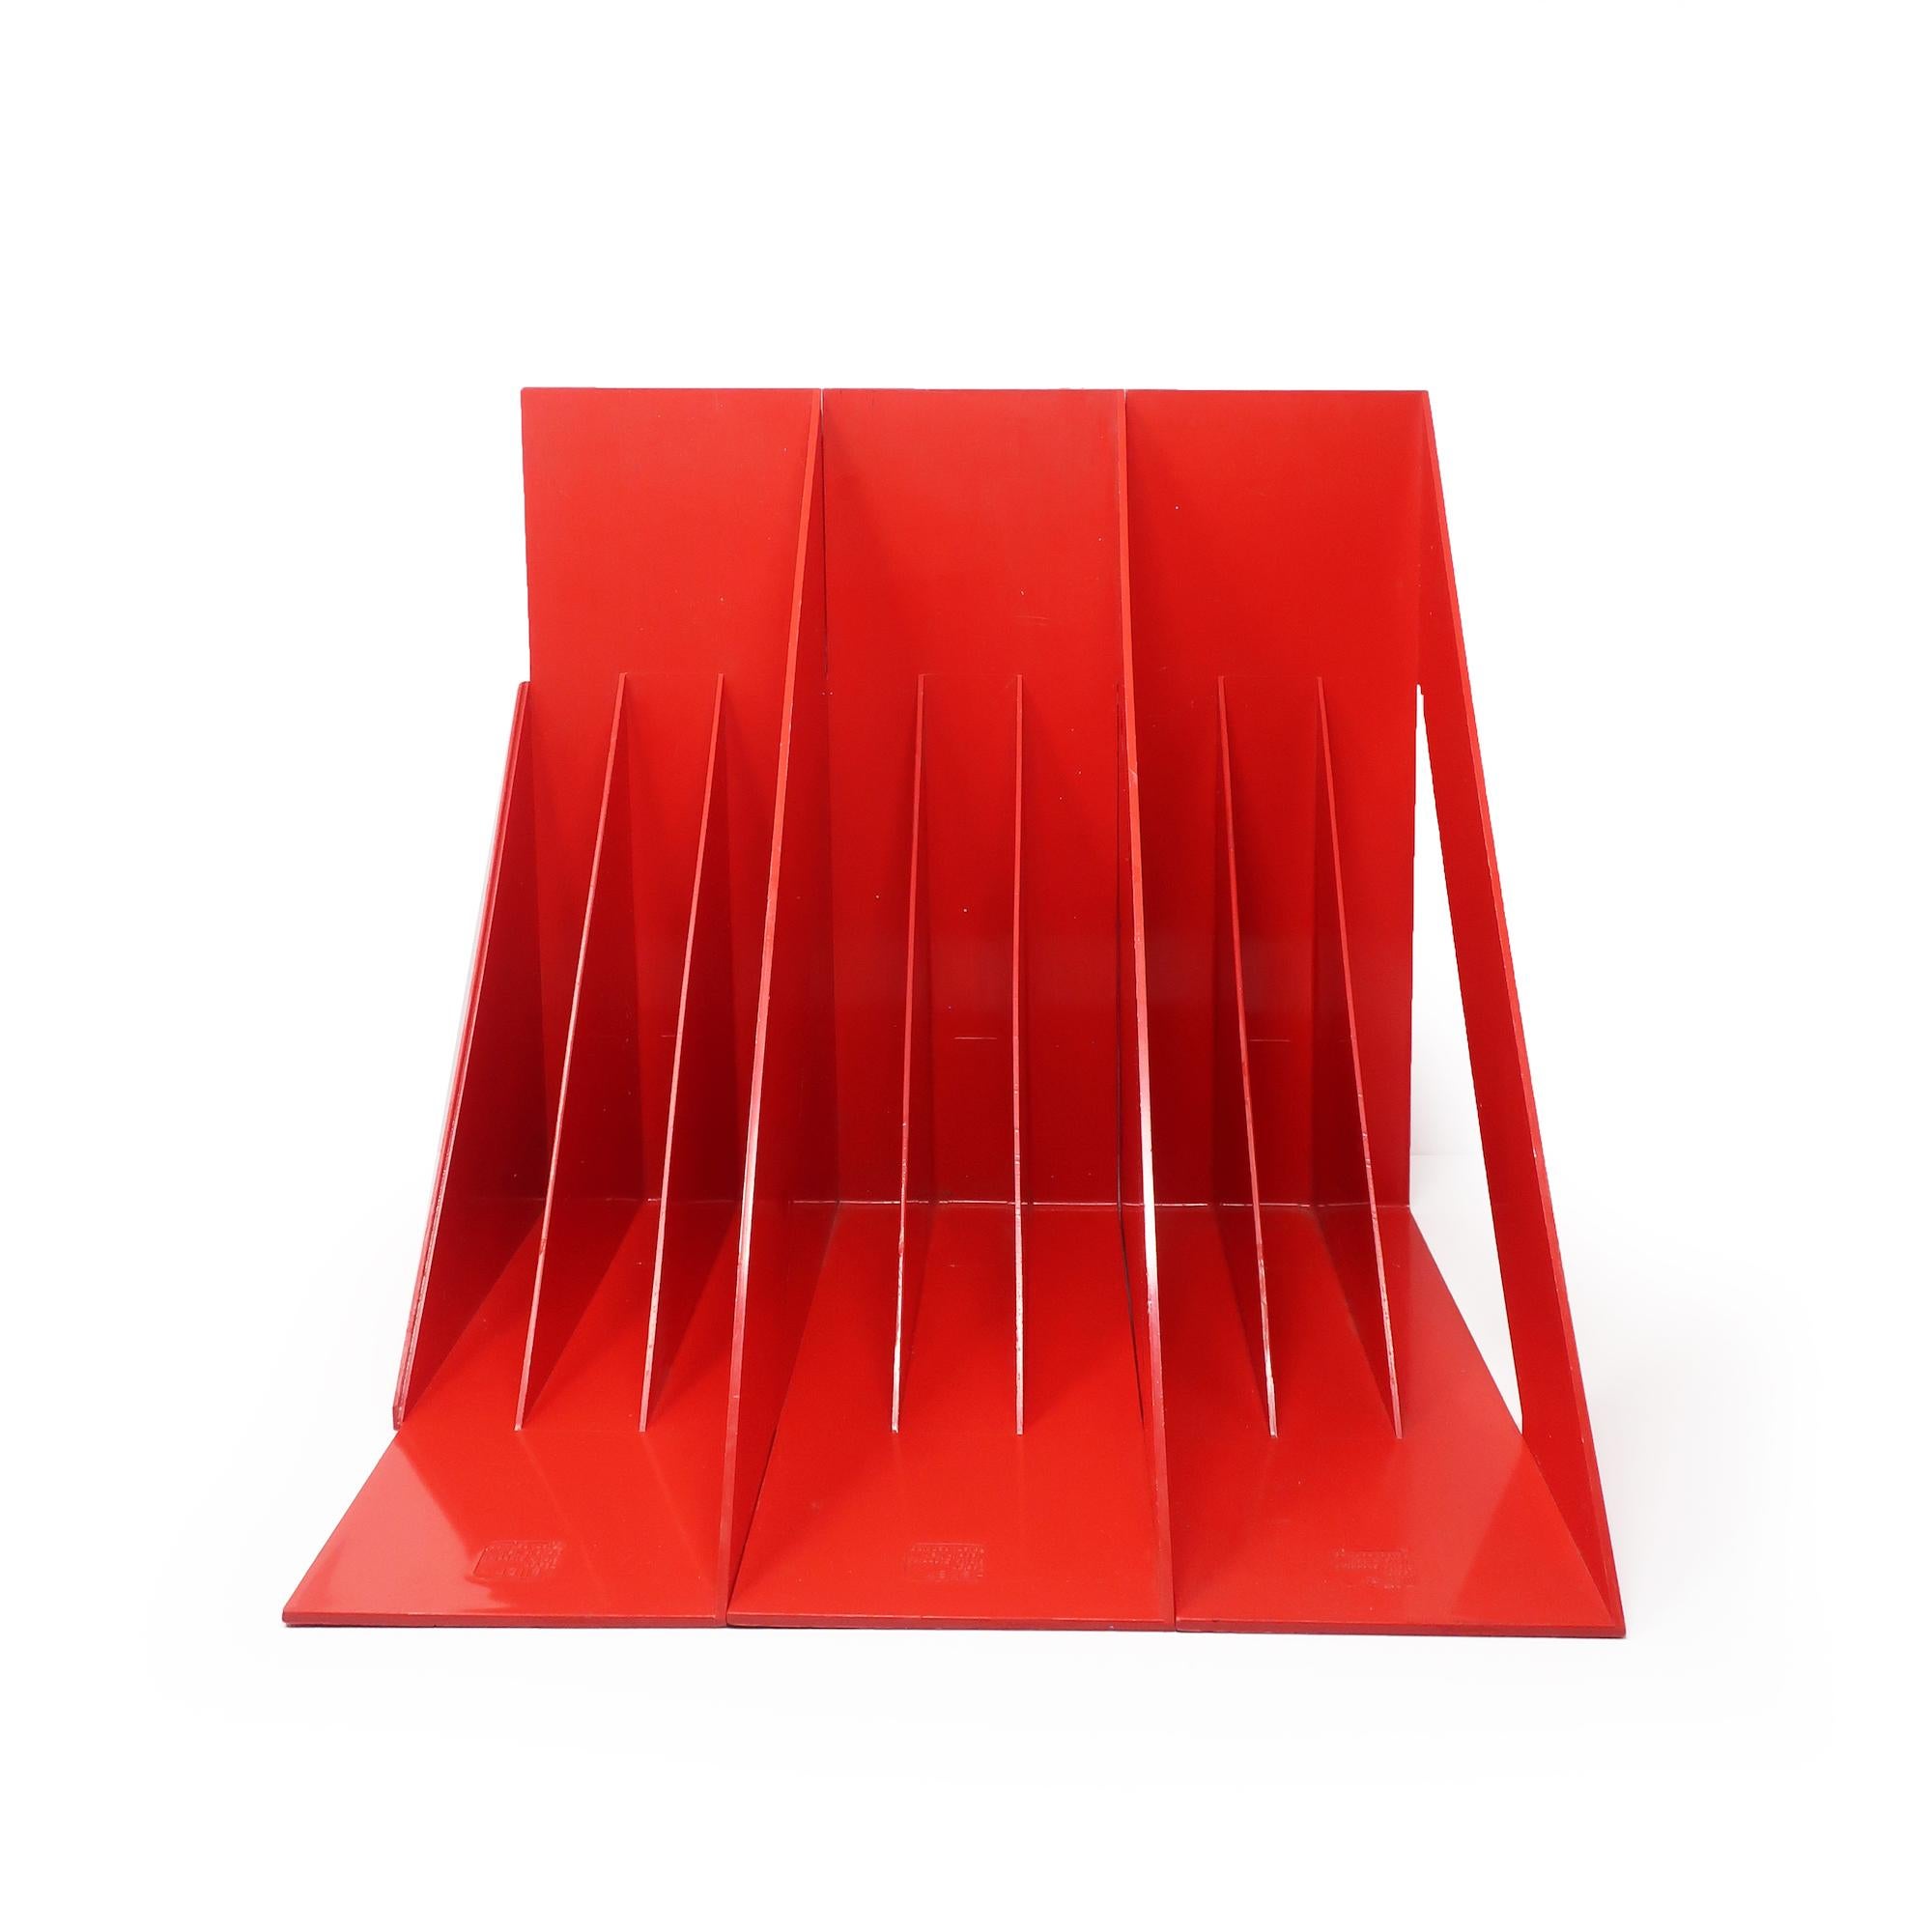 20th Century Set of 3 Red Record or Magazine Racks by Giotto Stoppino for Heller For Sale